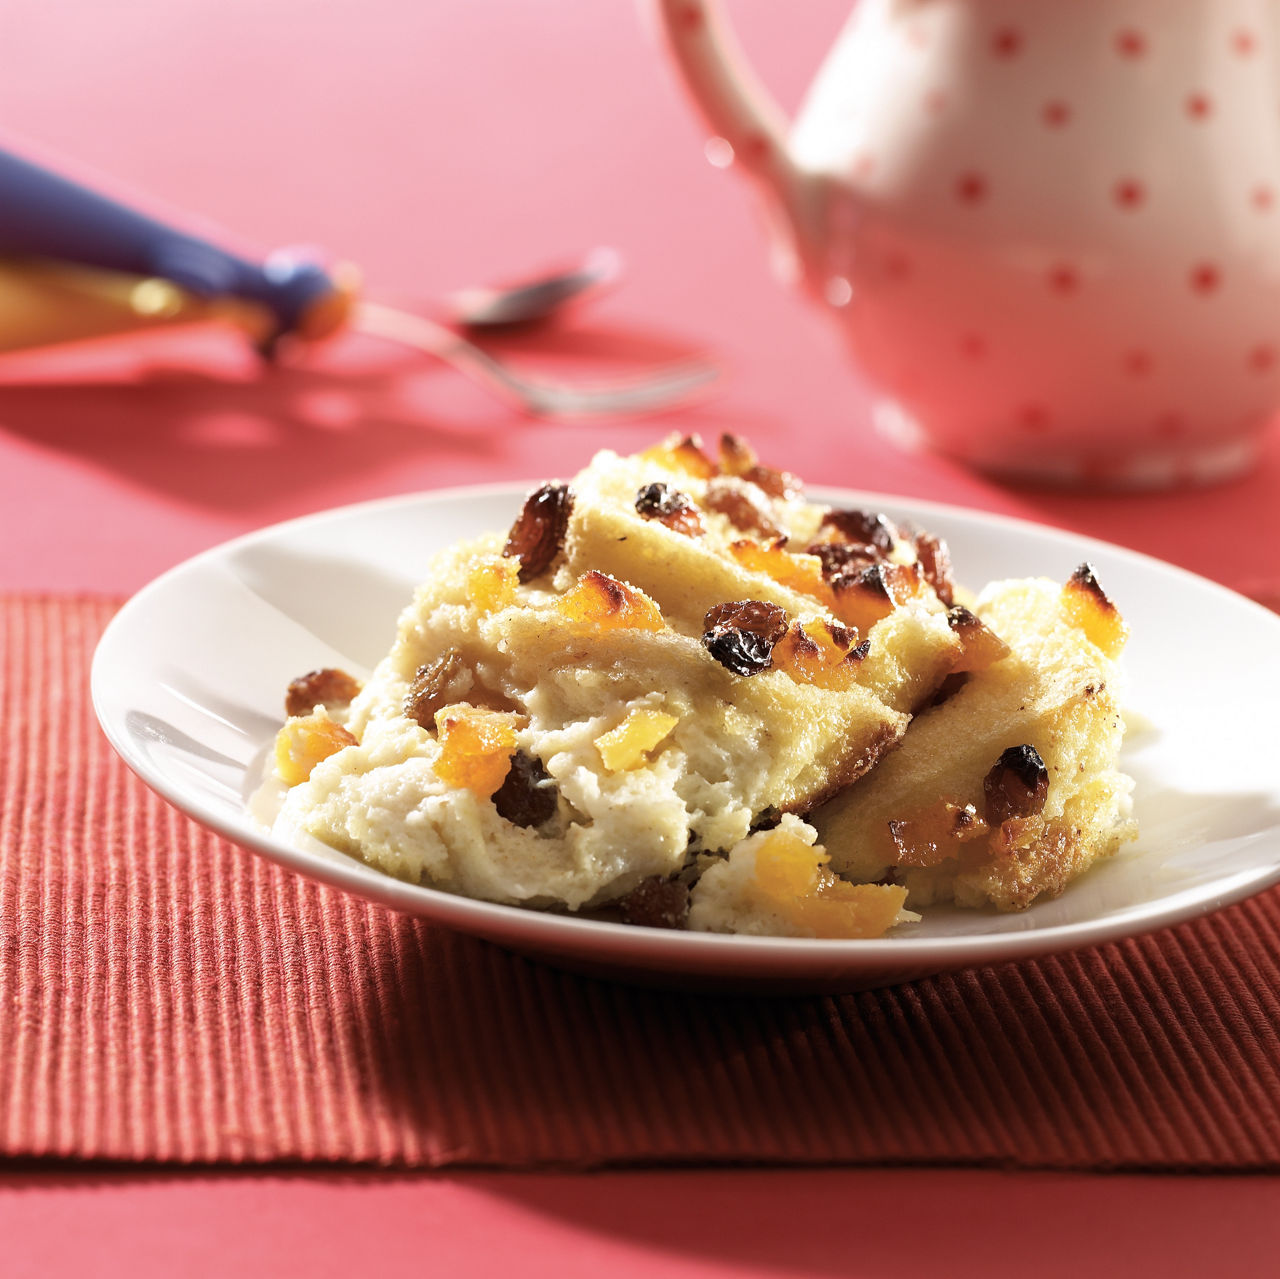 Image of bread and butter pudding to accompany recipe